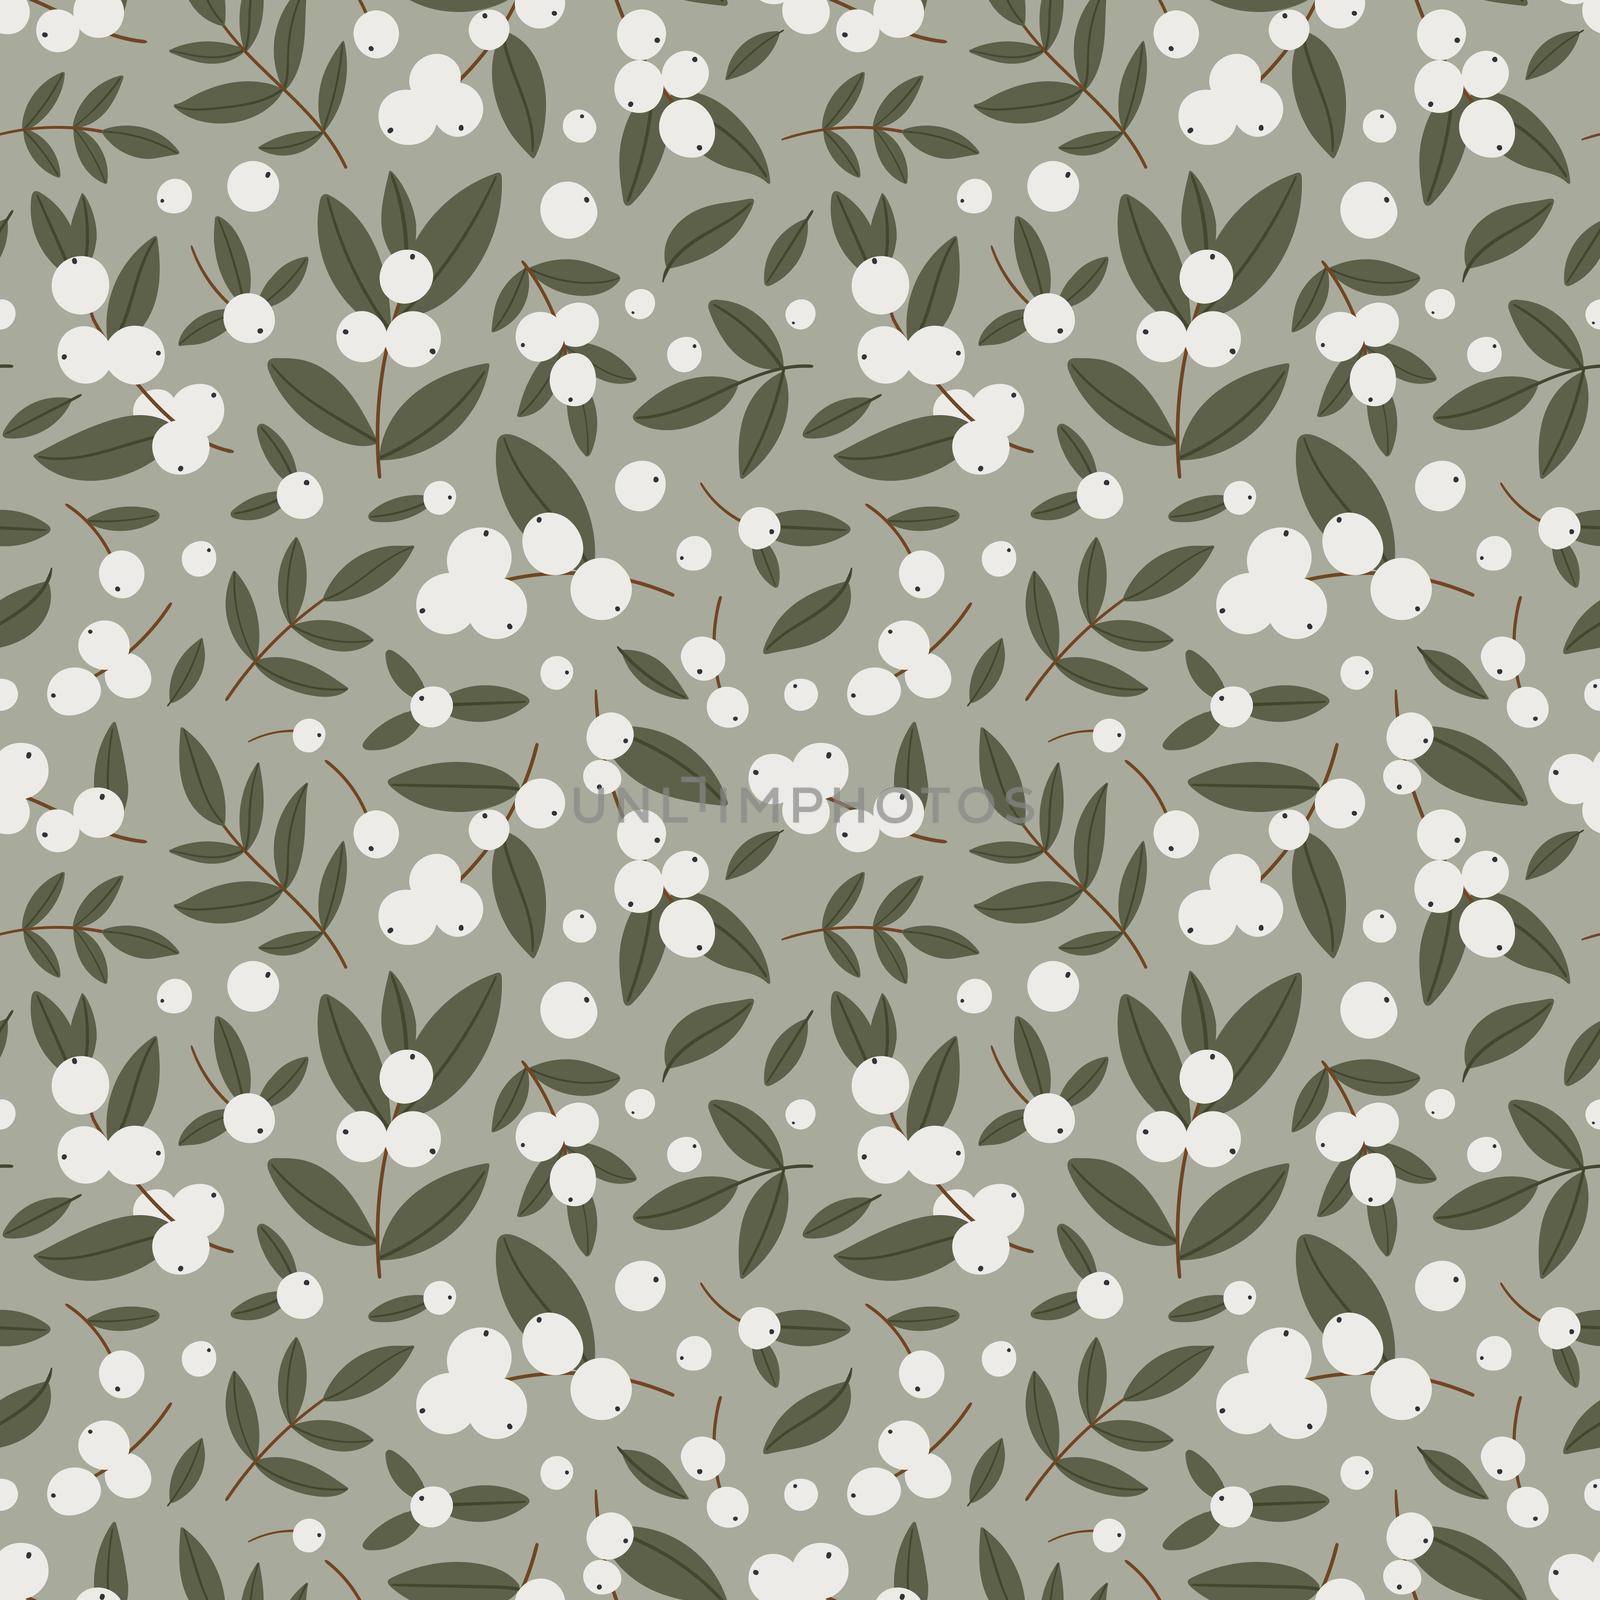 Seamless pattern with winter white berries on an olive background. by Lena_Khmelniuk